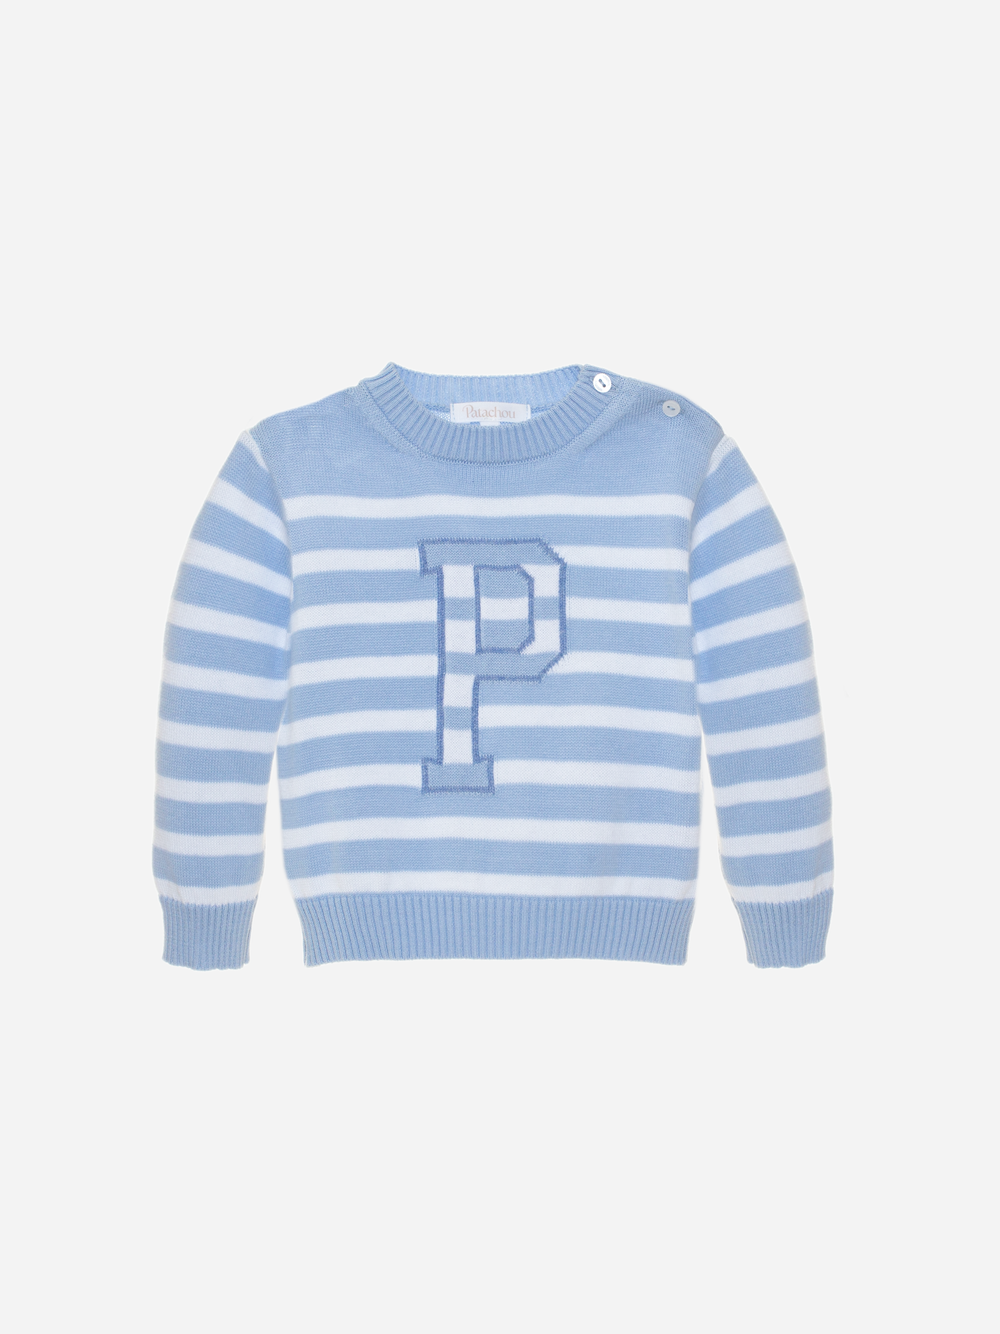 Boys blue sweater with white stripes